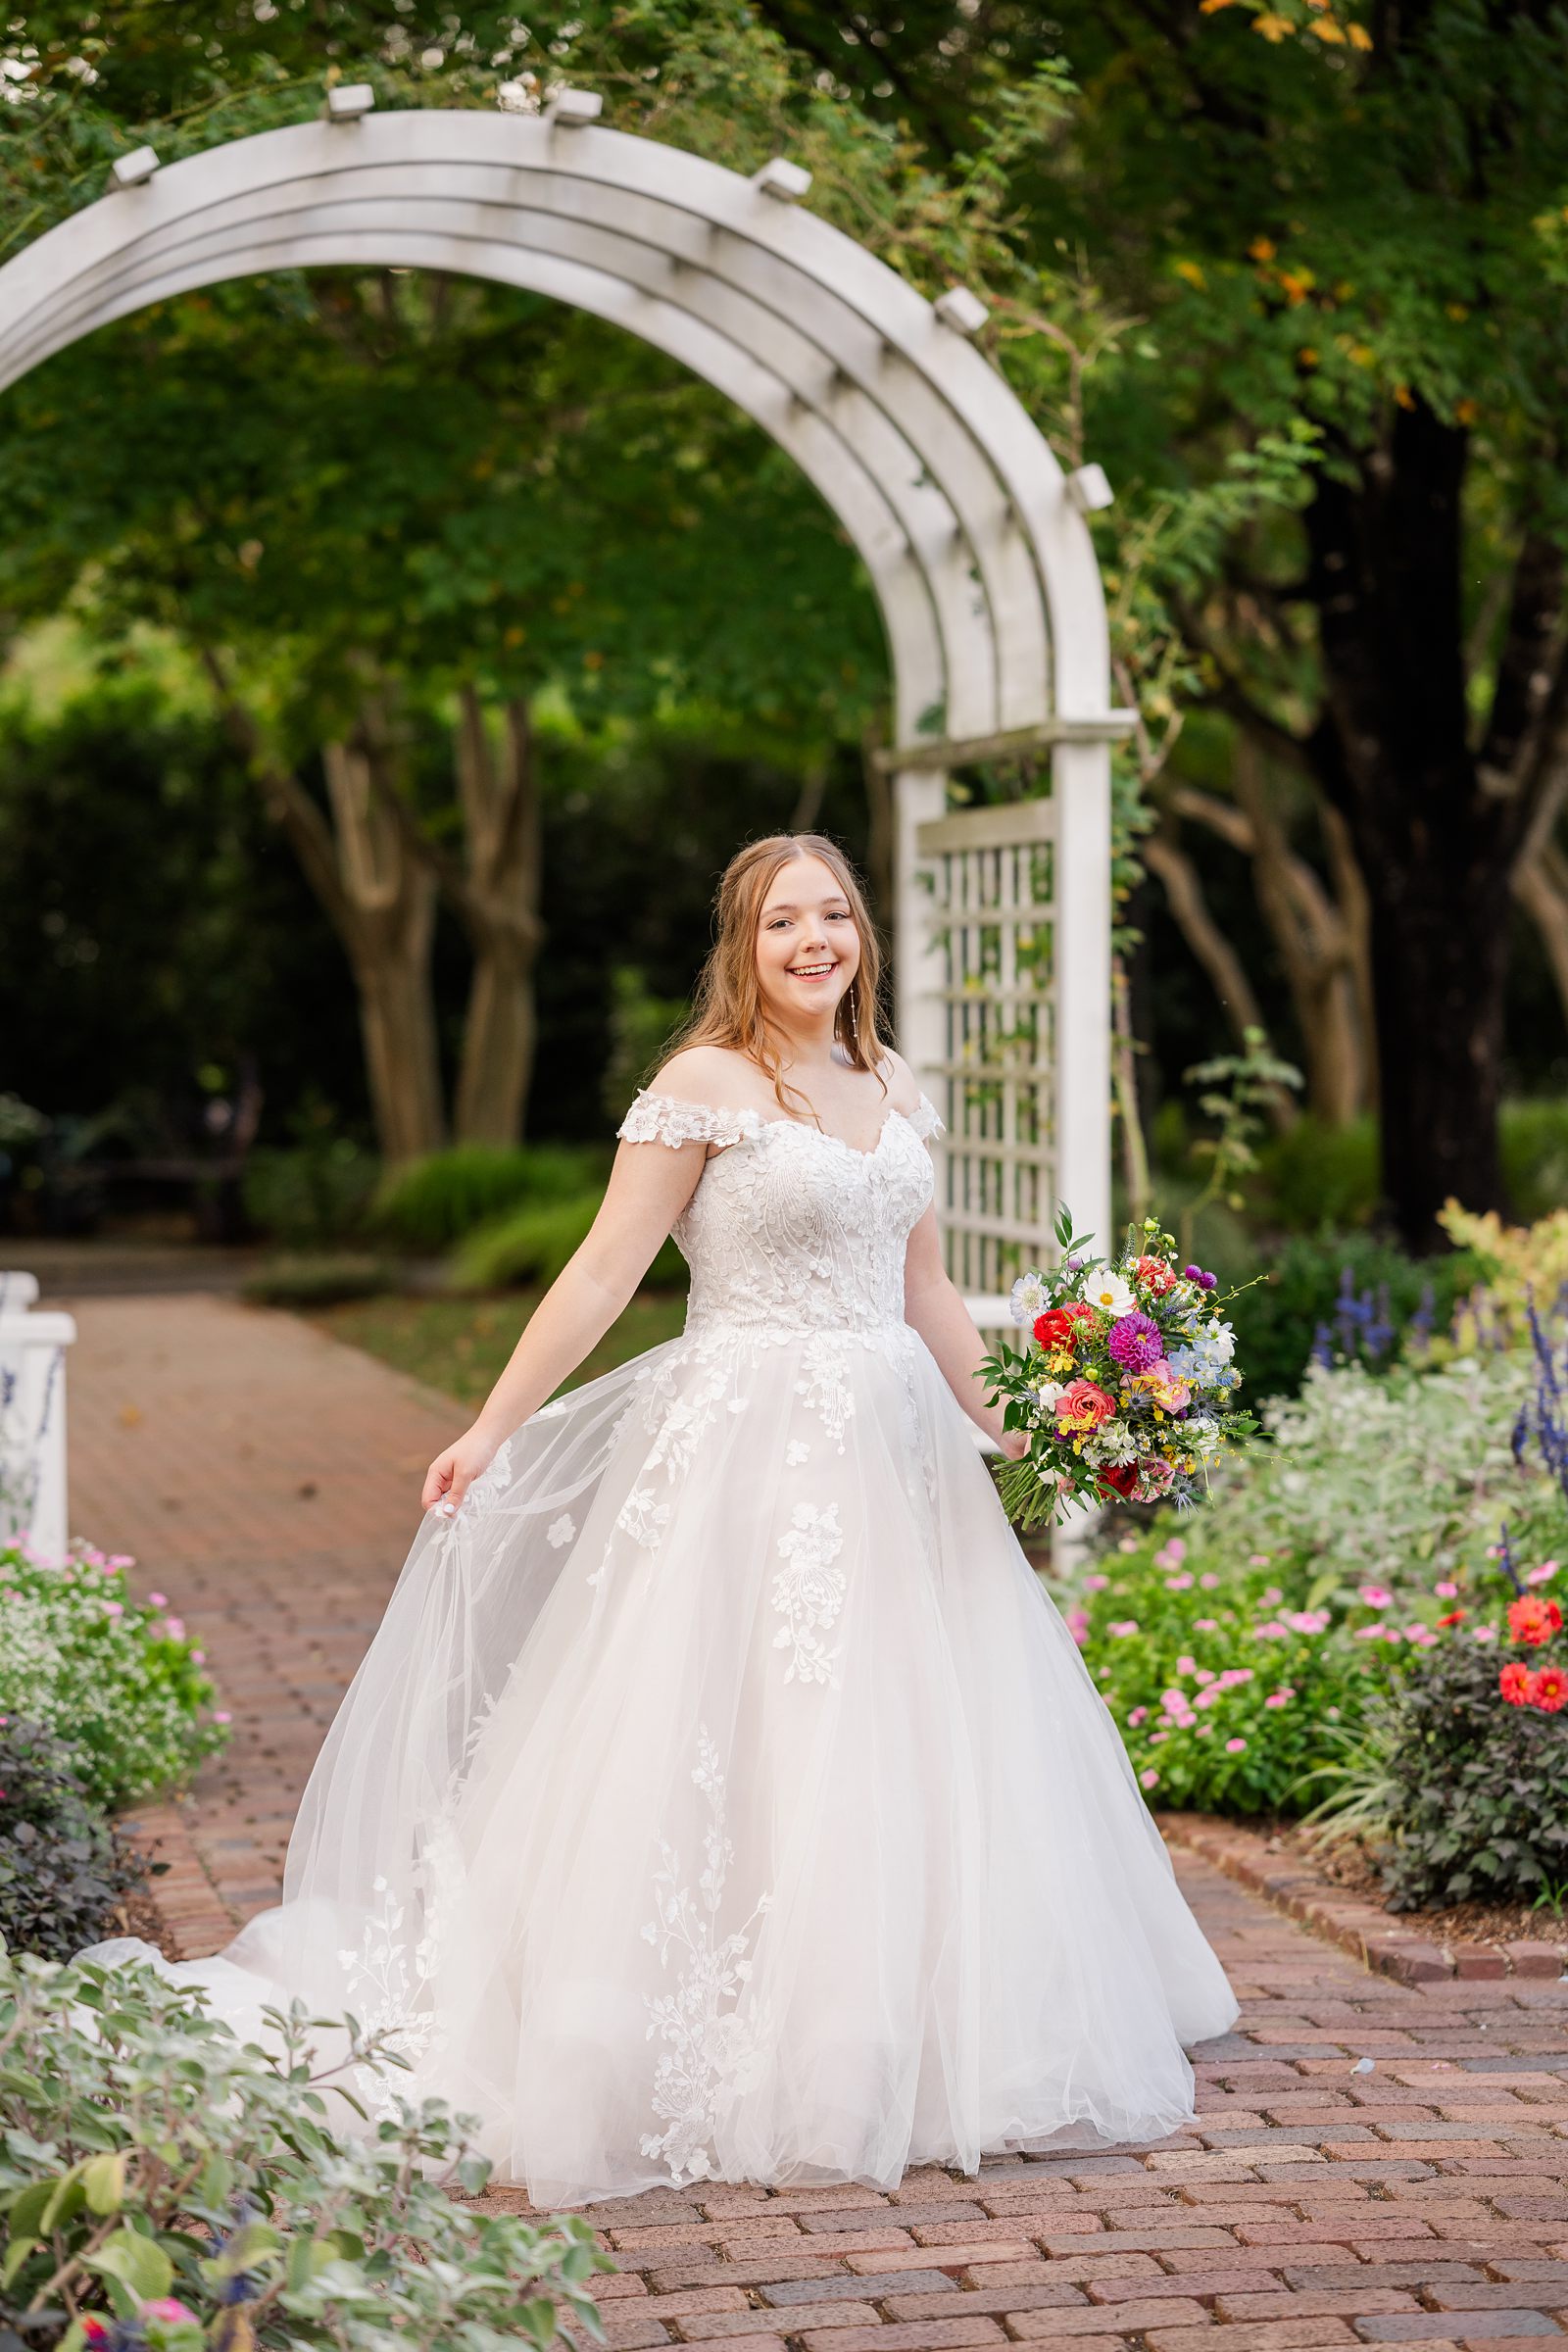 Bridal Portraits in the Garden at Fall Lewis Ginter Wedding 